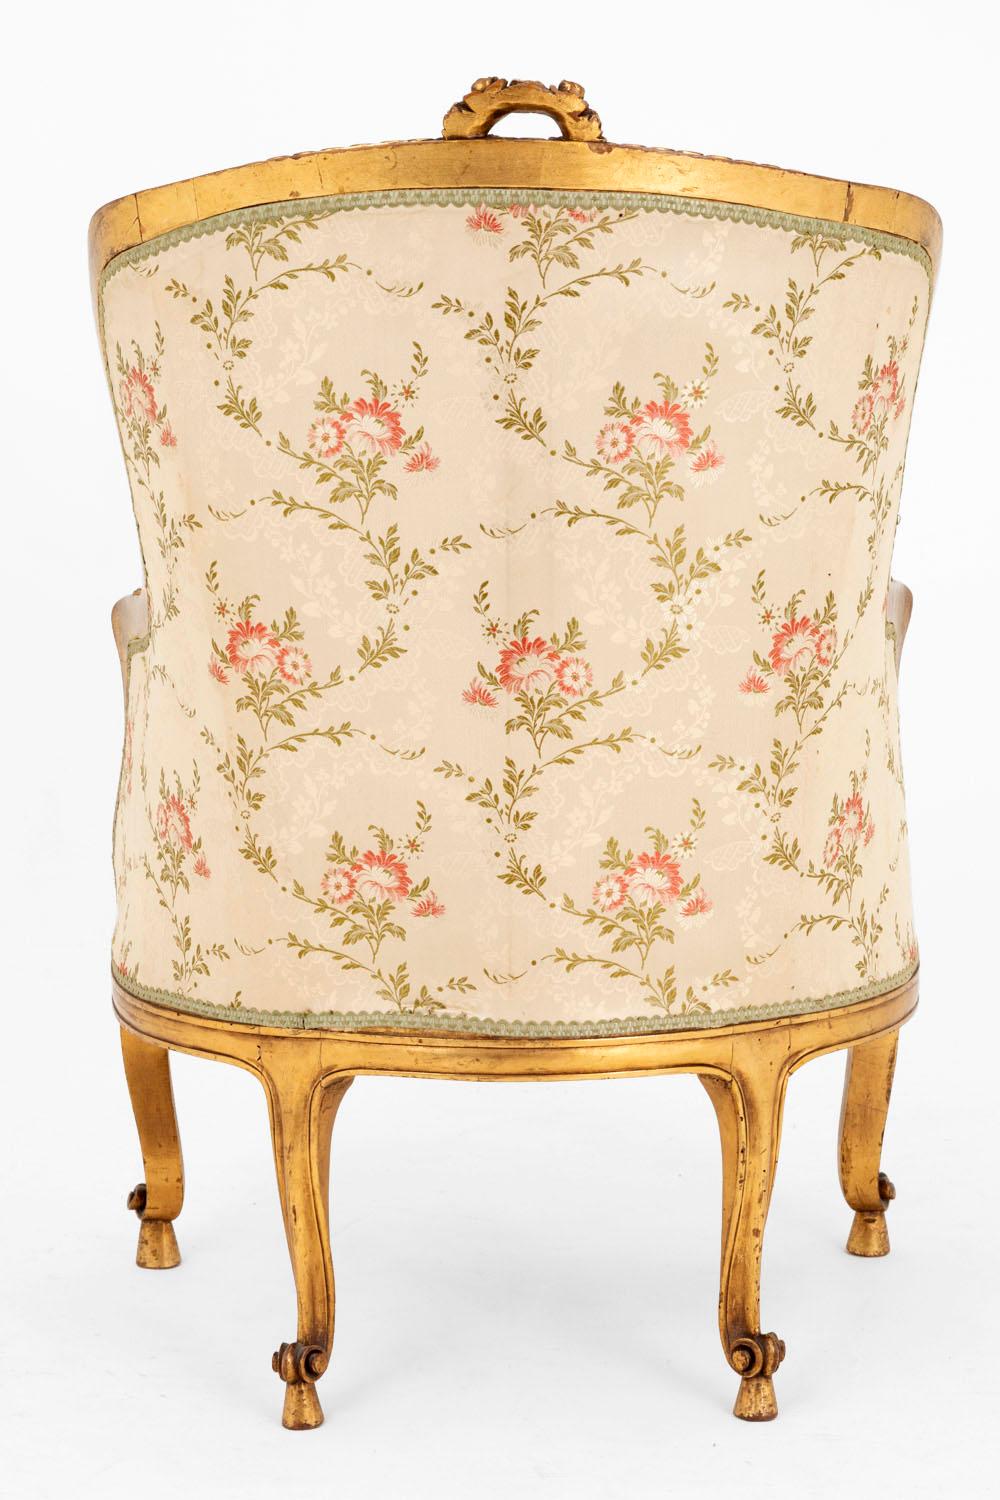 Transition style bergere in carved and giltwood with foliage and interlacing decor. Four cabriole legs ending in scrolls and standing on square bases. The seat profile is slightly bulged and covered with a nice champagne fabric decorated of red and